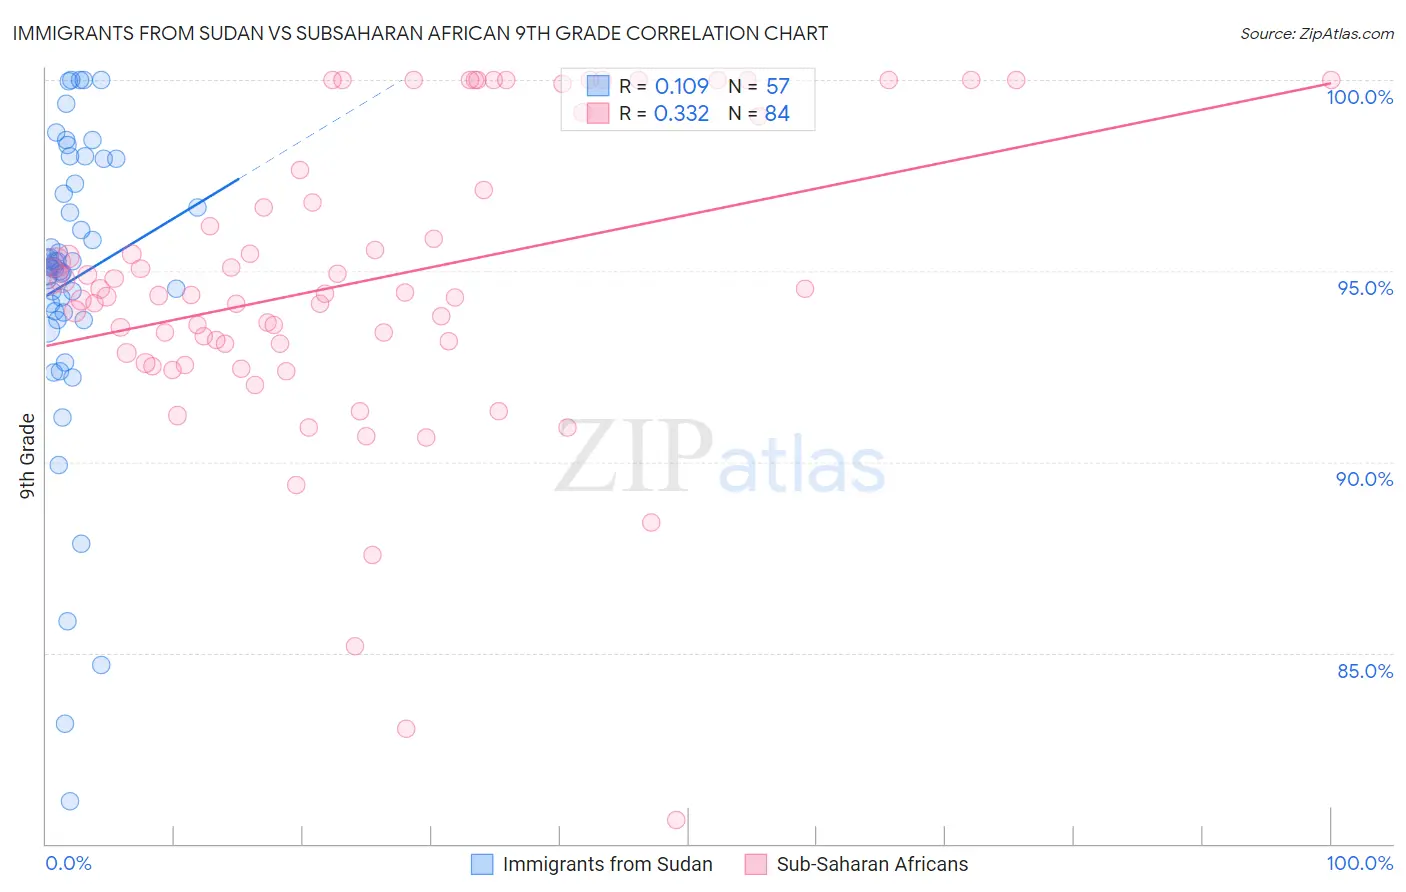 Immigrants from Sudan vs Subsaharan African 9th Grade